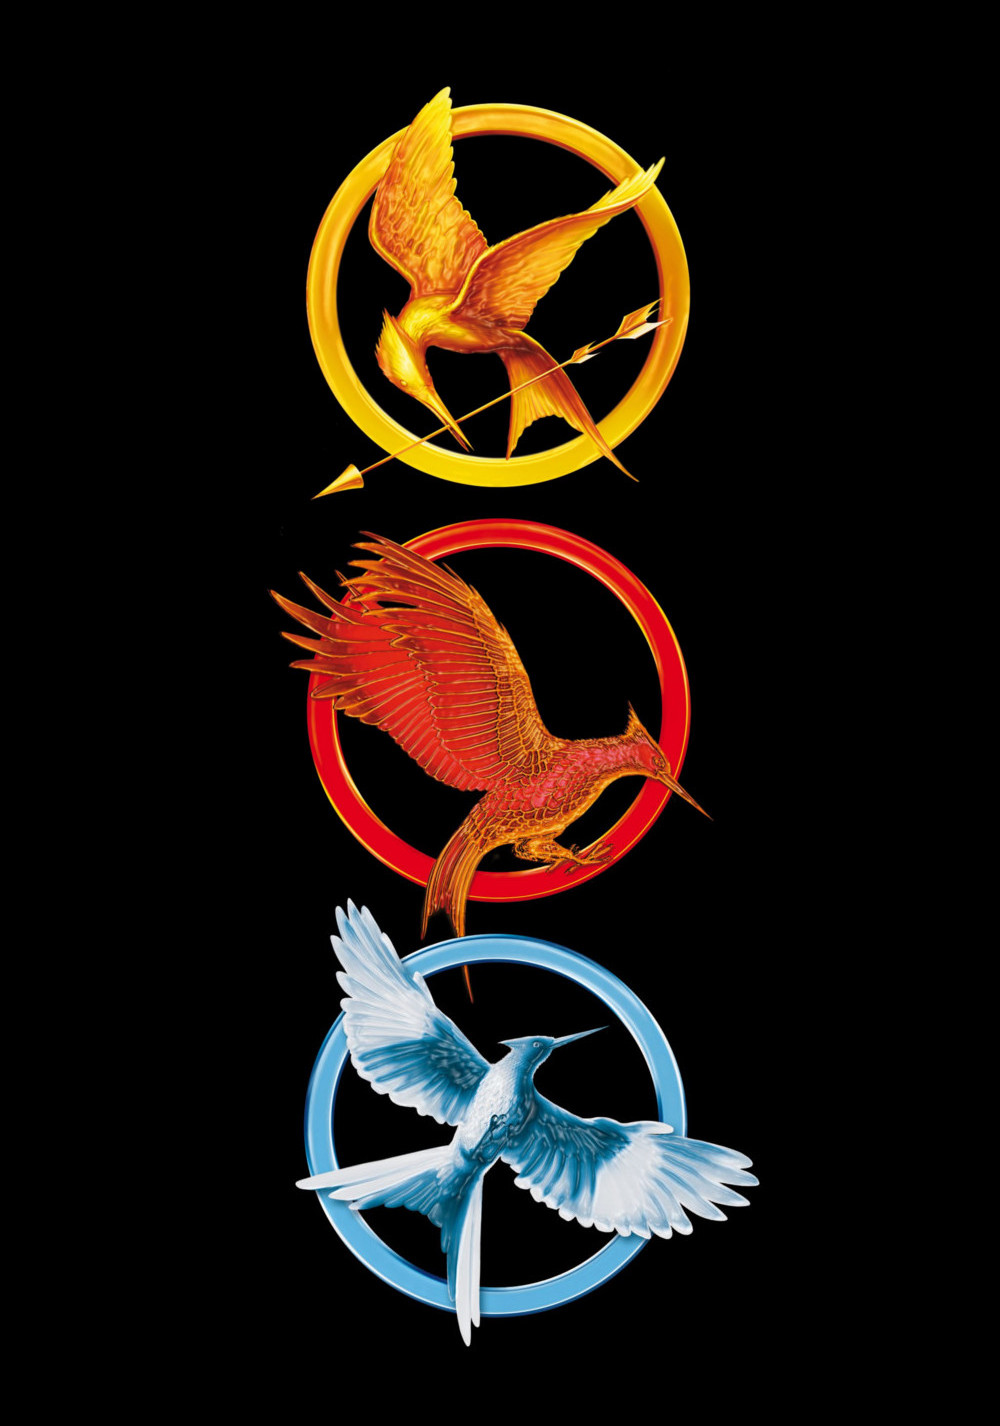 The Hunger Games Picture